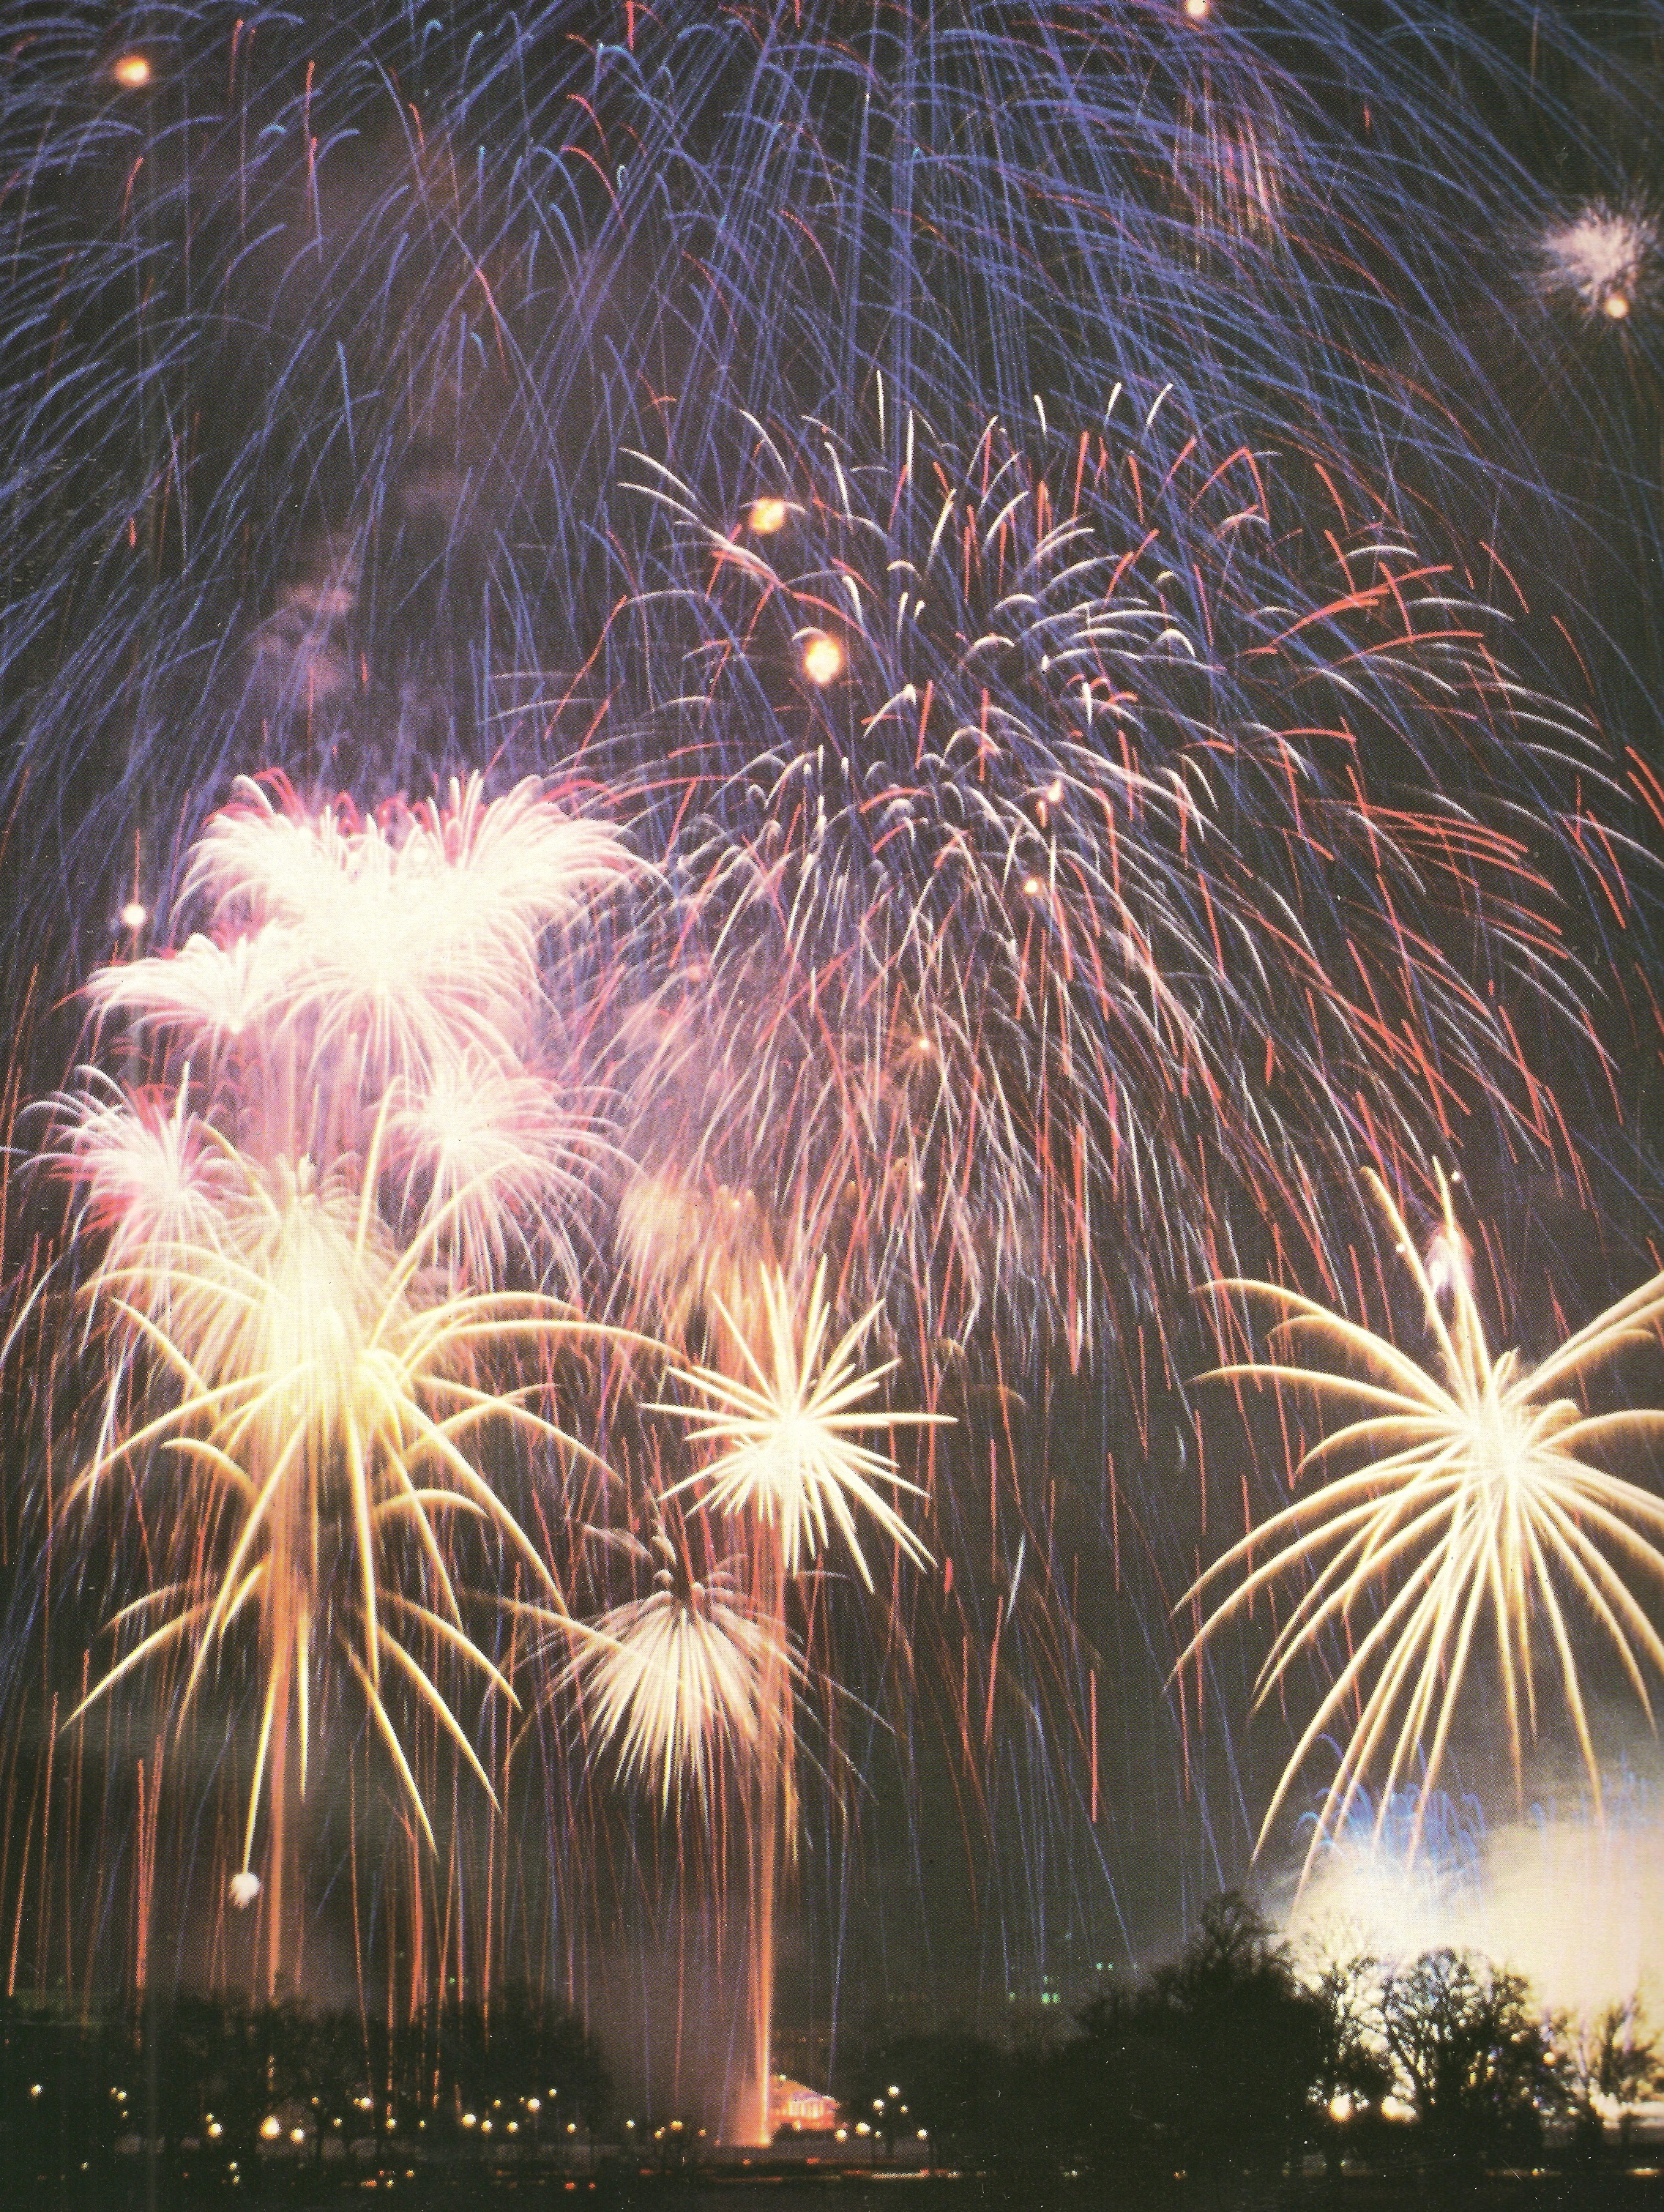 Extravagent firework displays marked Reagan's second Inaugural.